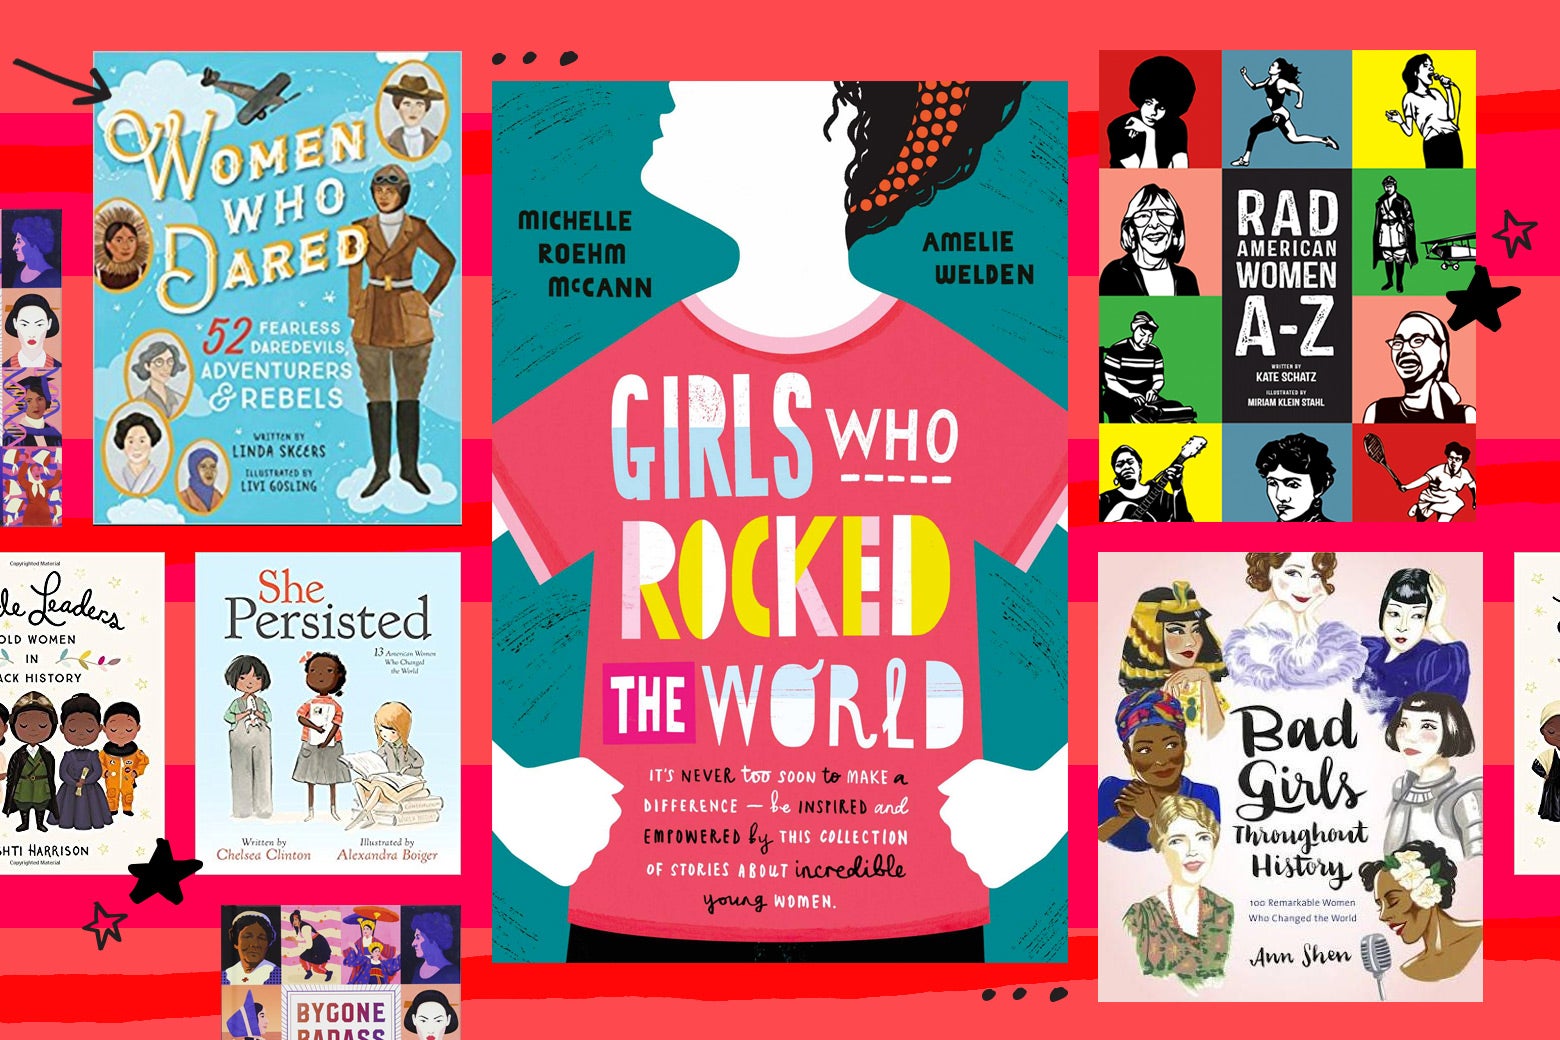 A collage of the cover of Girls Who Rocked the World and other books about "rebel" women in history.